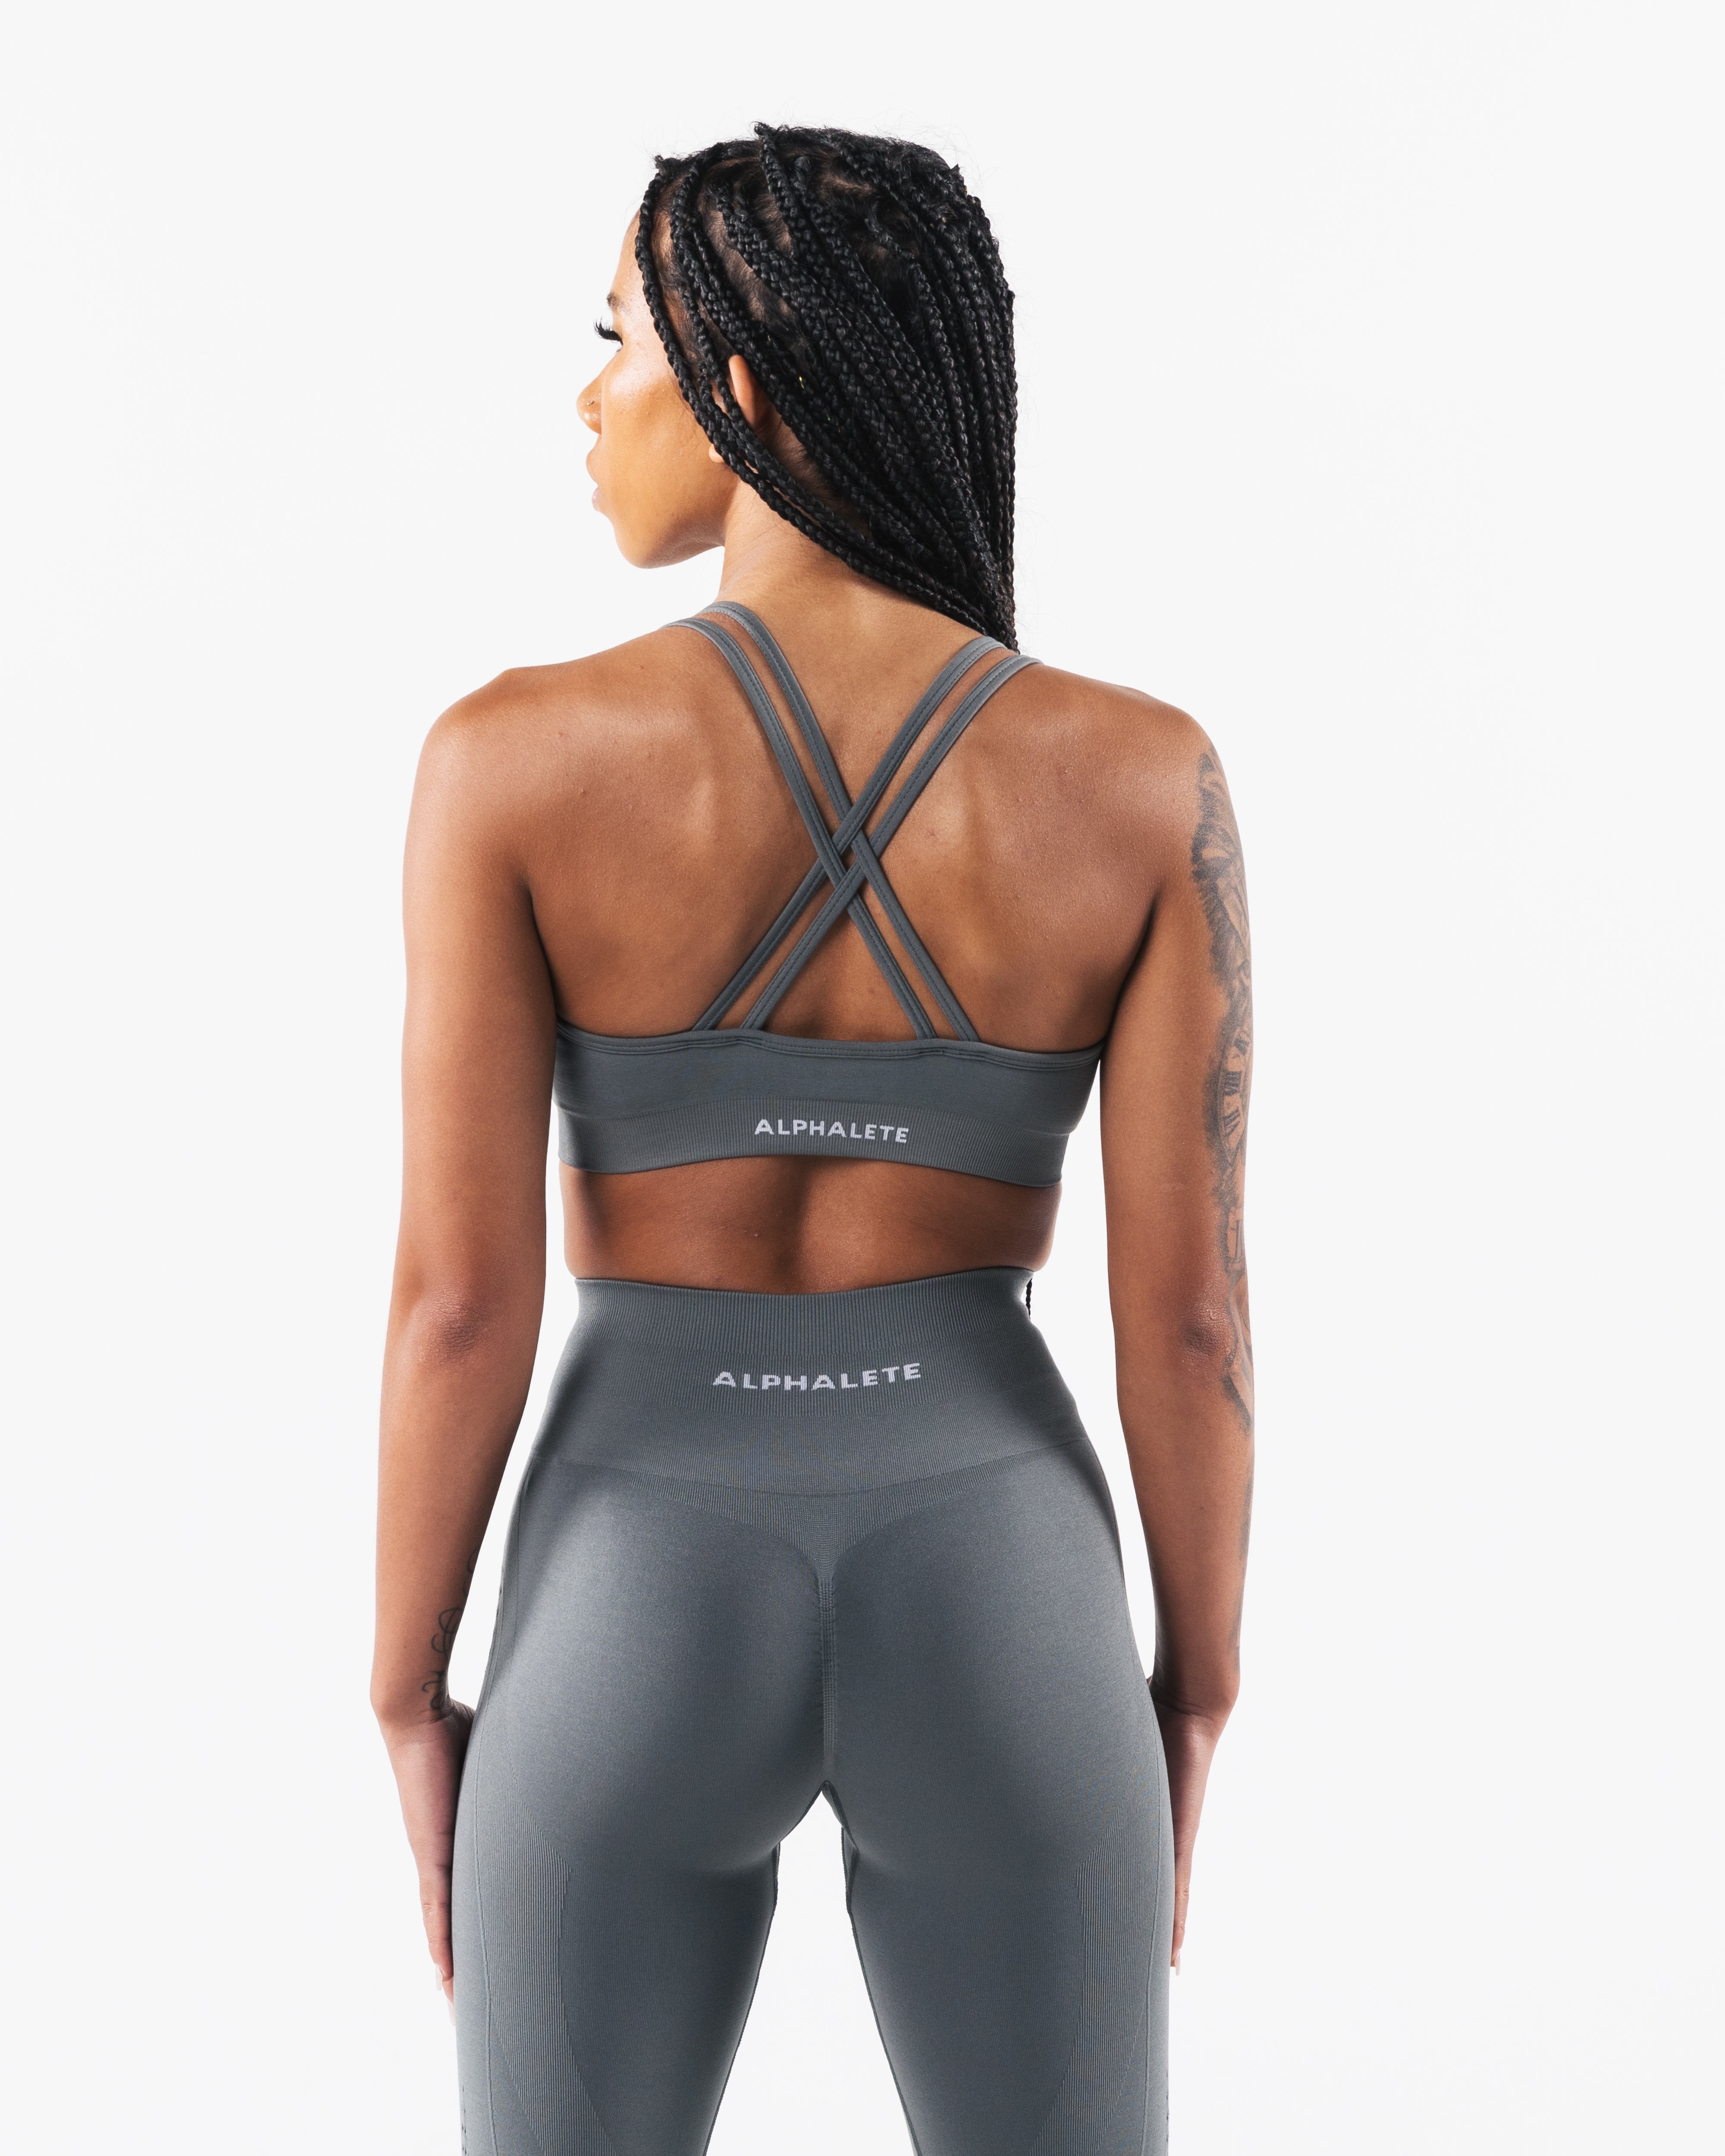 ALPHALETE AMPLIFY DUPES ROUND 2  new collection, different waistband,  popular sports bra dupe 